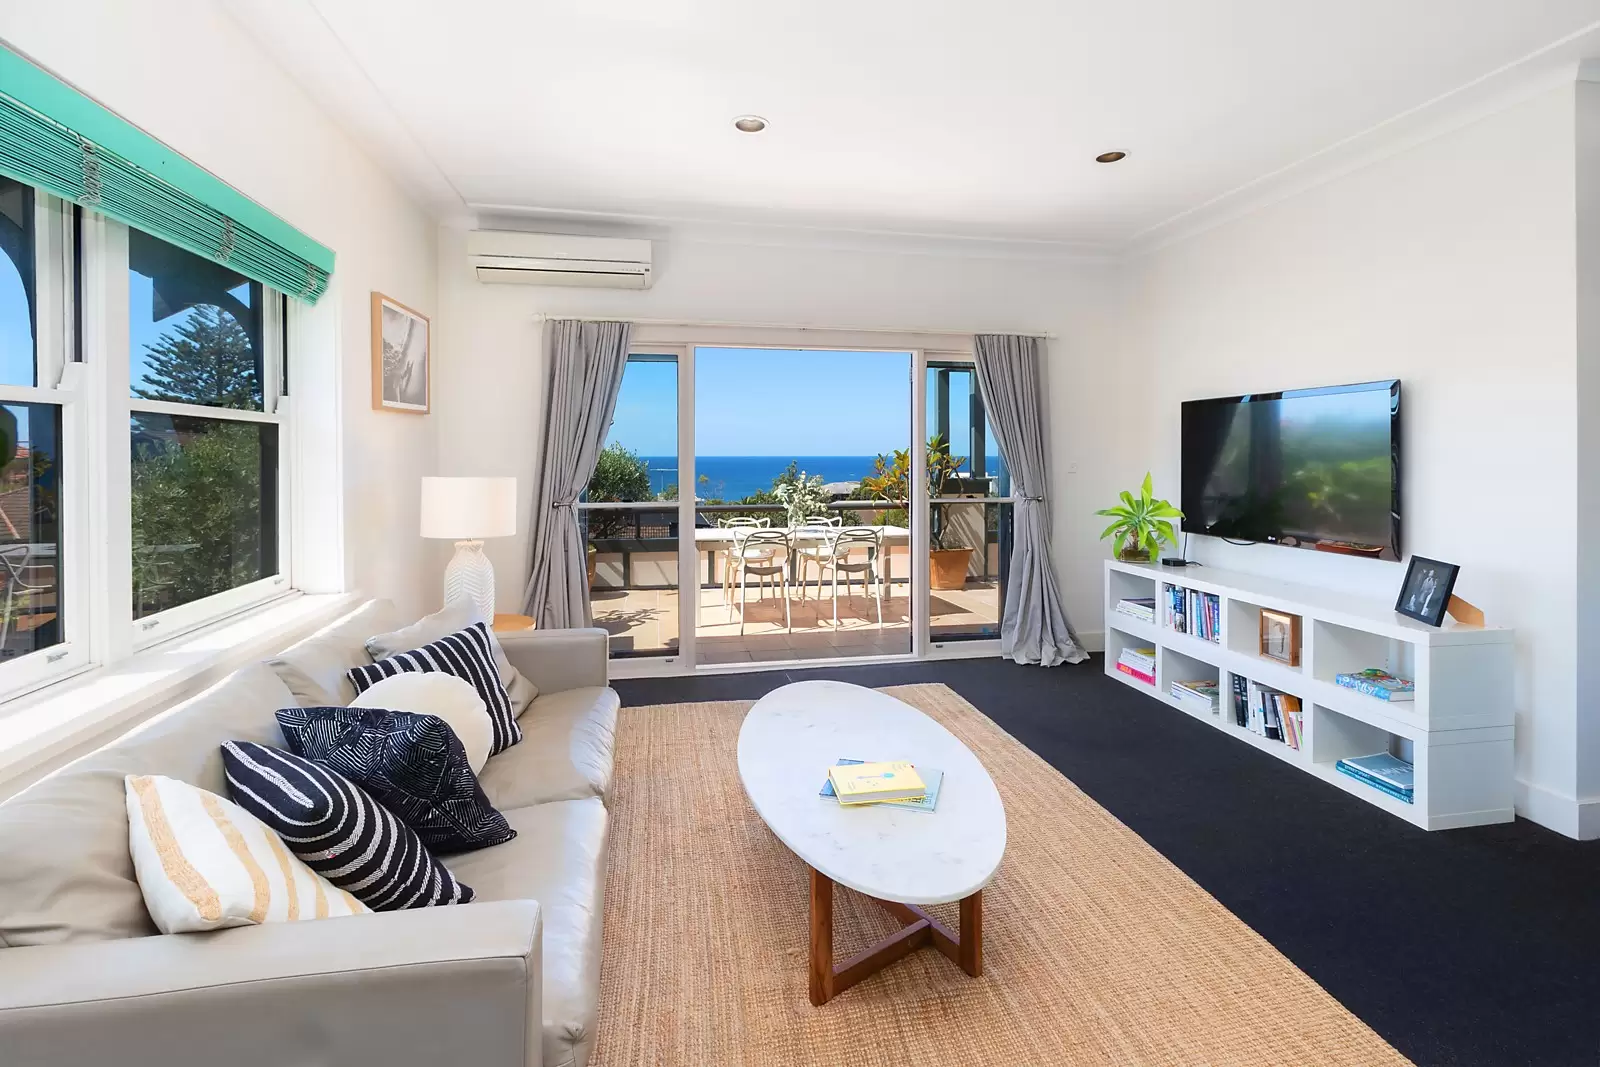 Photo #12: 82 Beach Street, Coogee - Sold by Sydney Sotheby's International Realty